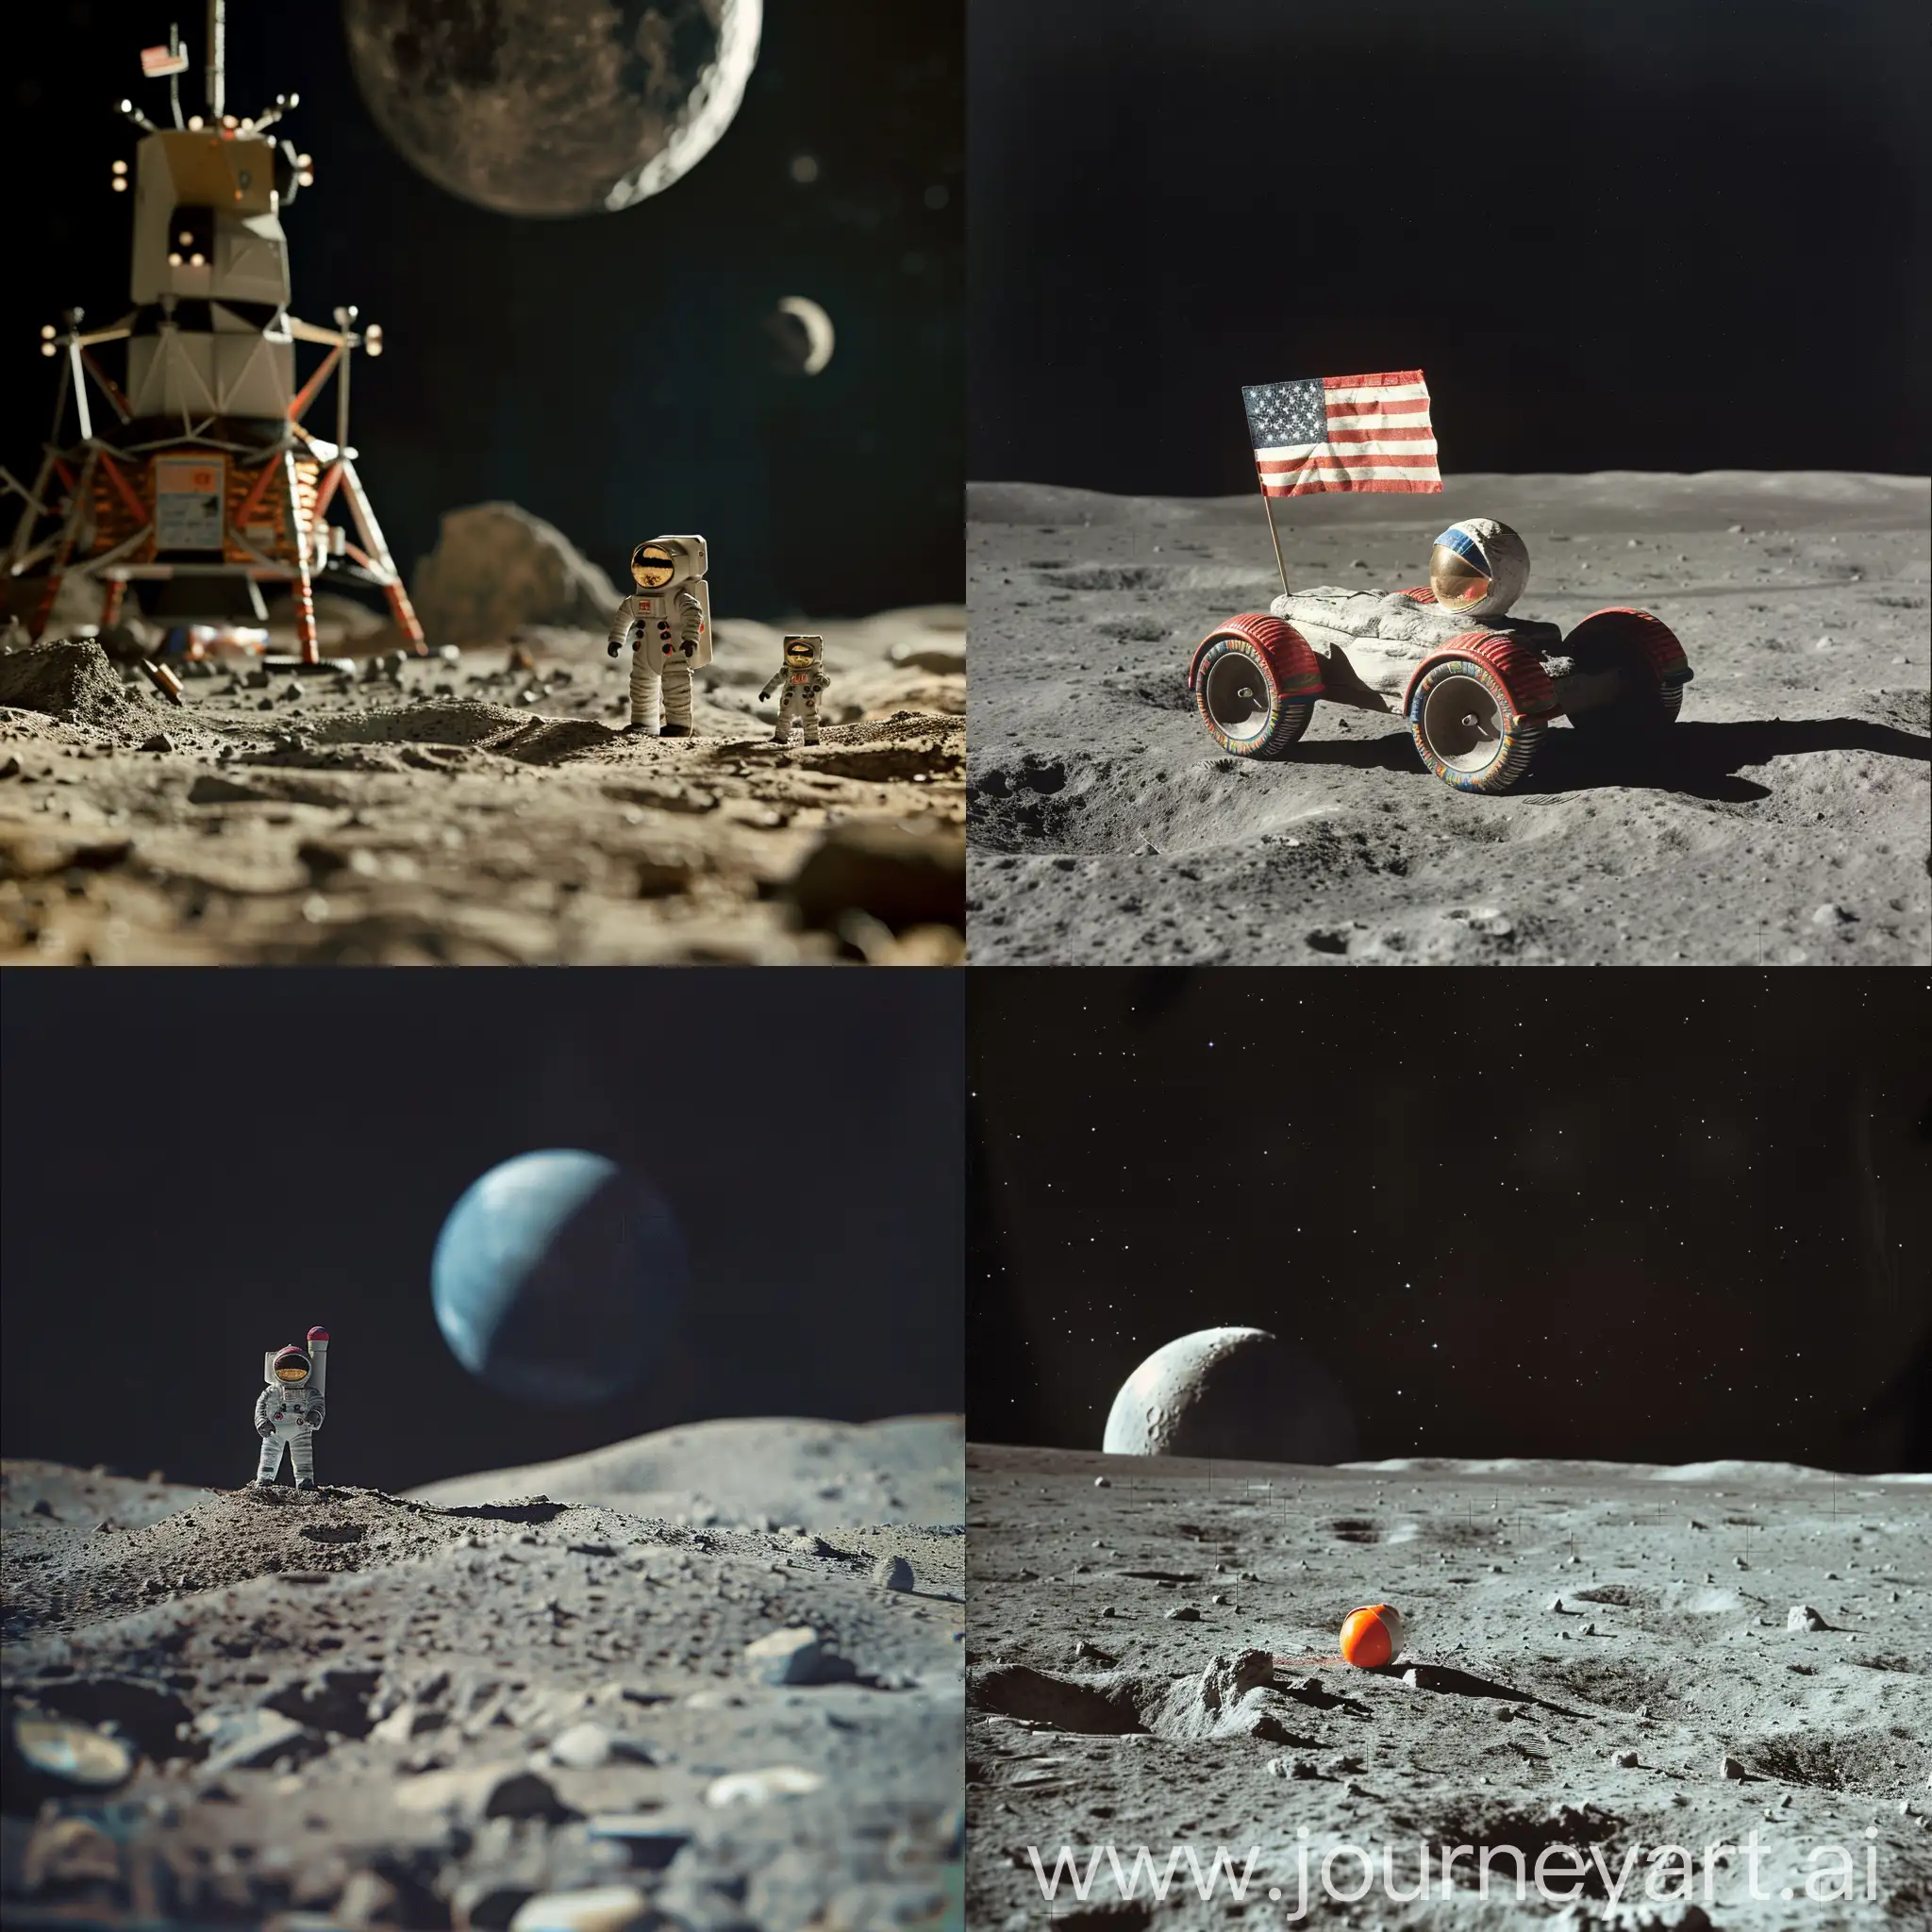 Children-Playing-with-New-Toy-on-the-Moon